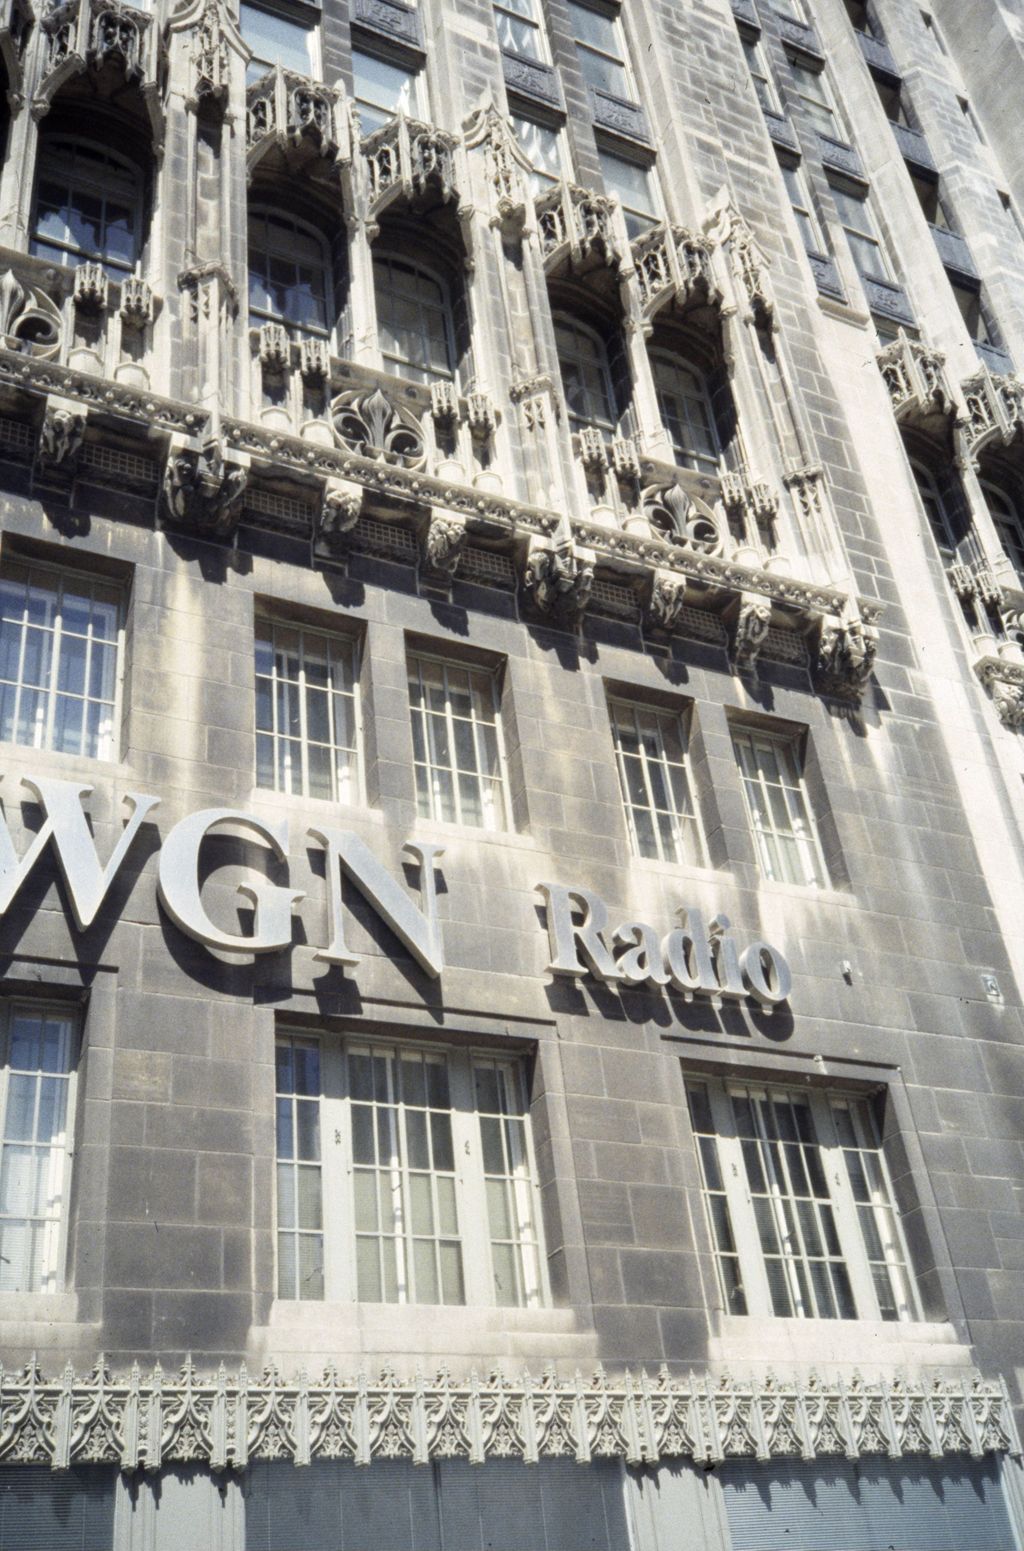 Tribune Tower architectural ornament and WGN Radio sign